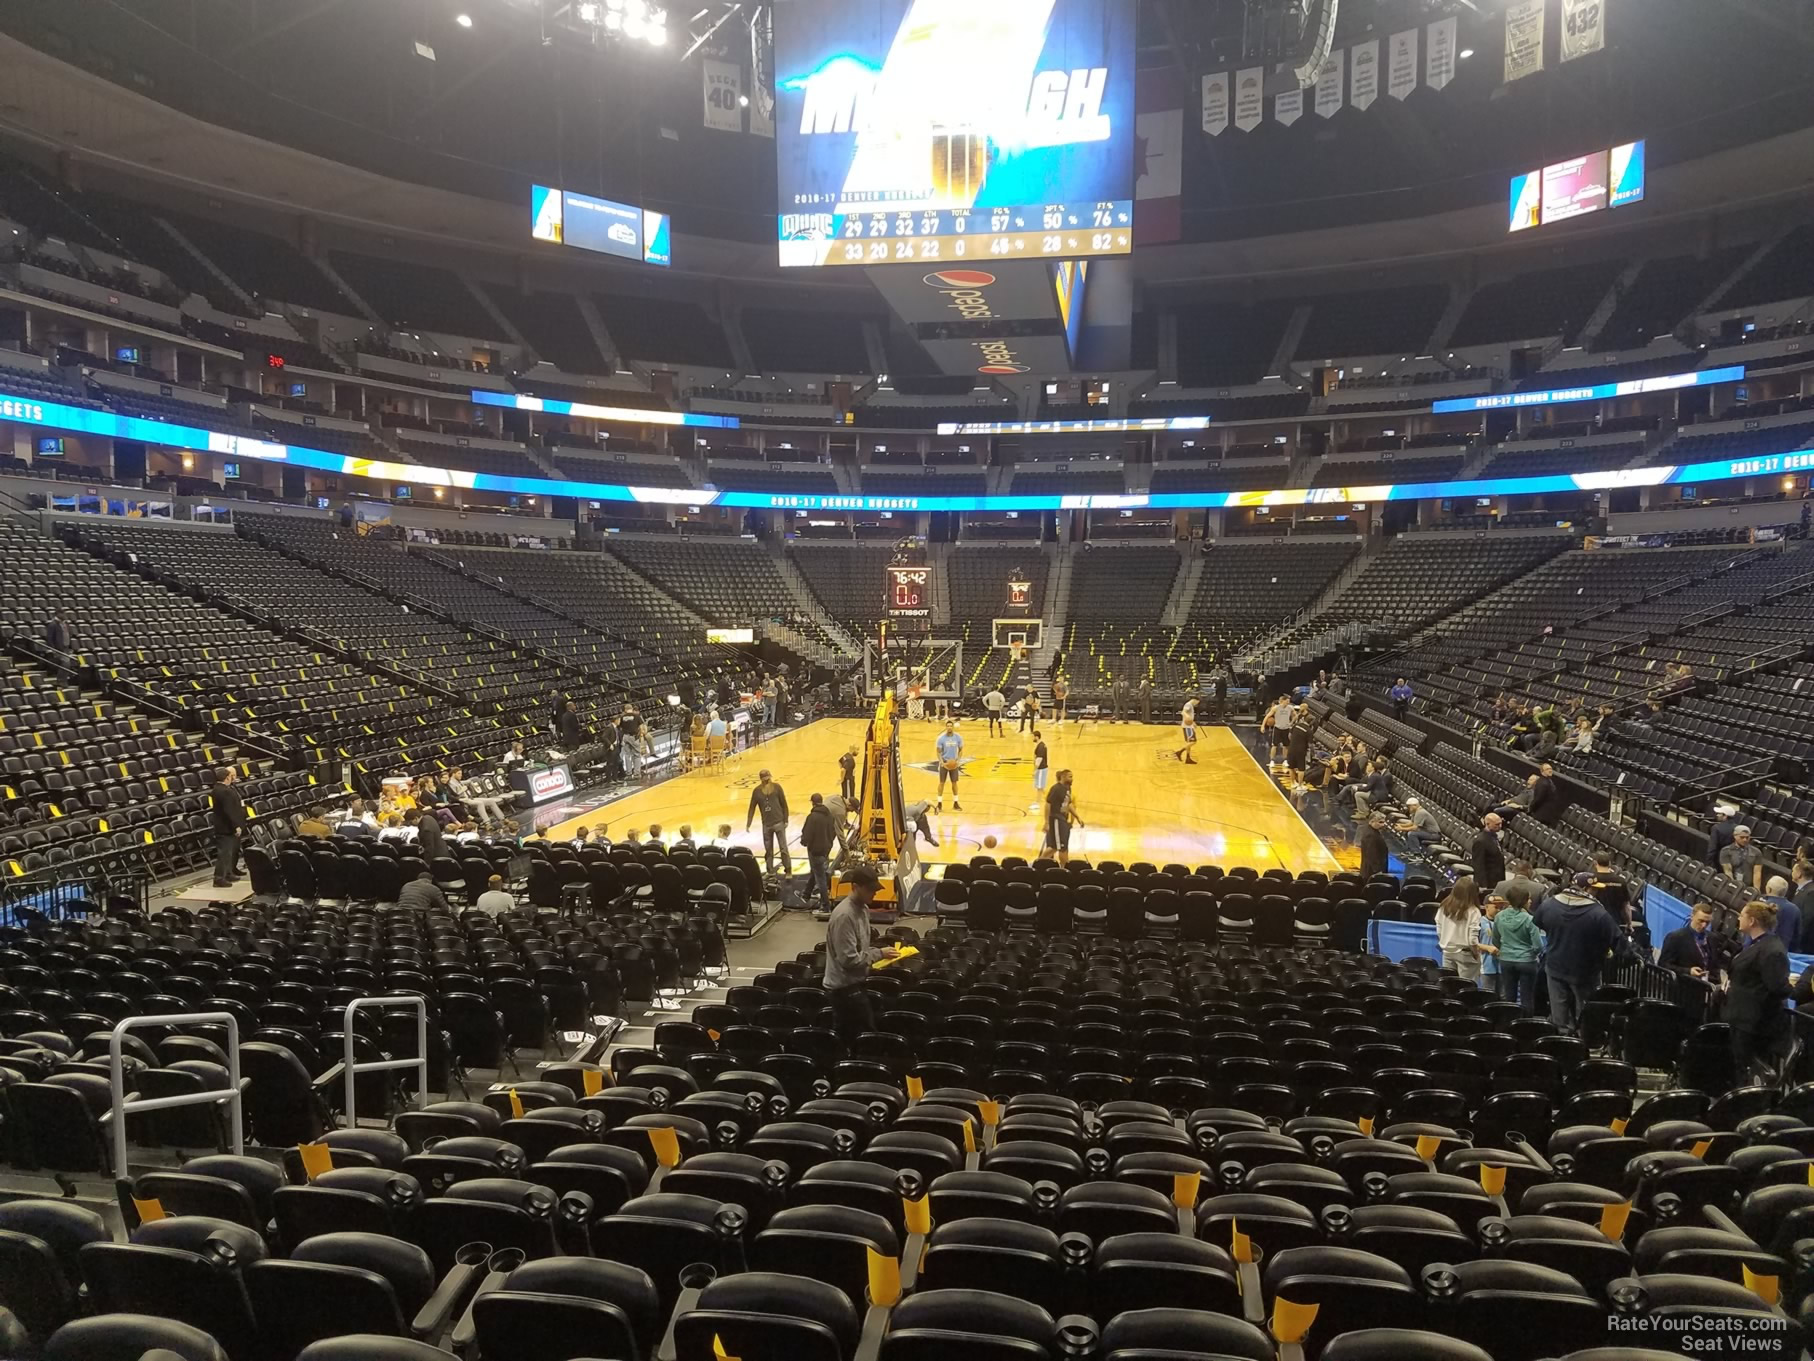 section 136, row 11 seat view  for basketball - ball arena